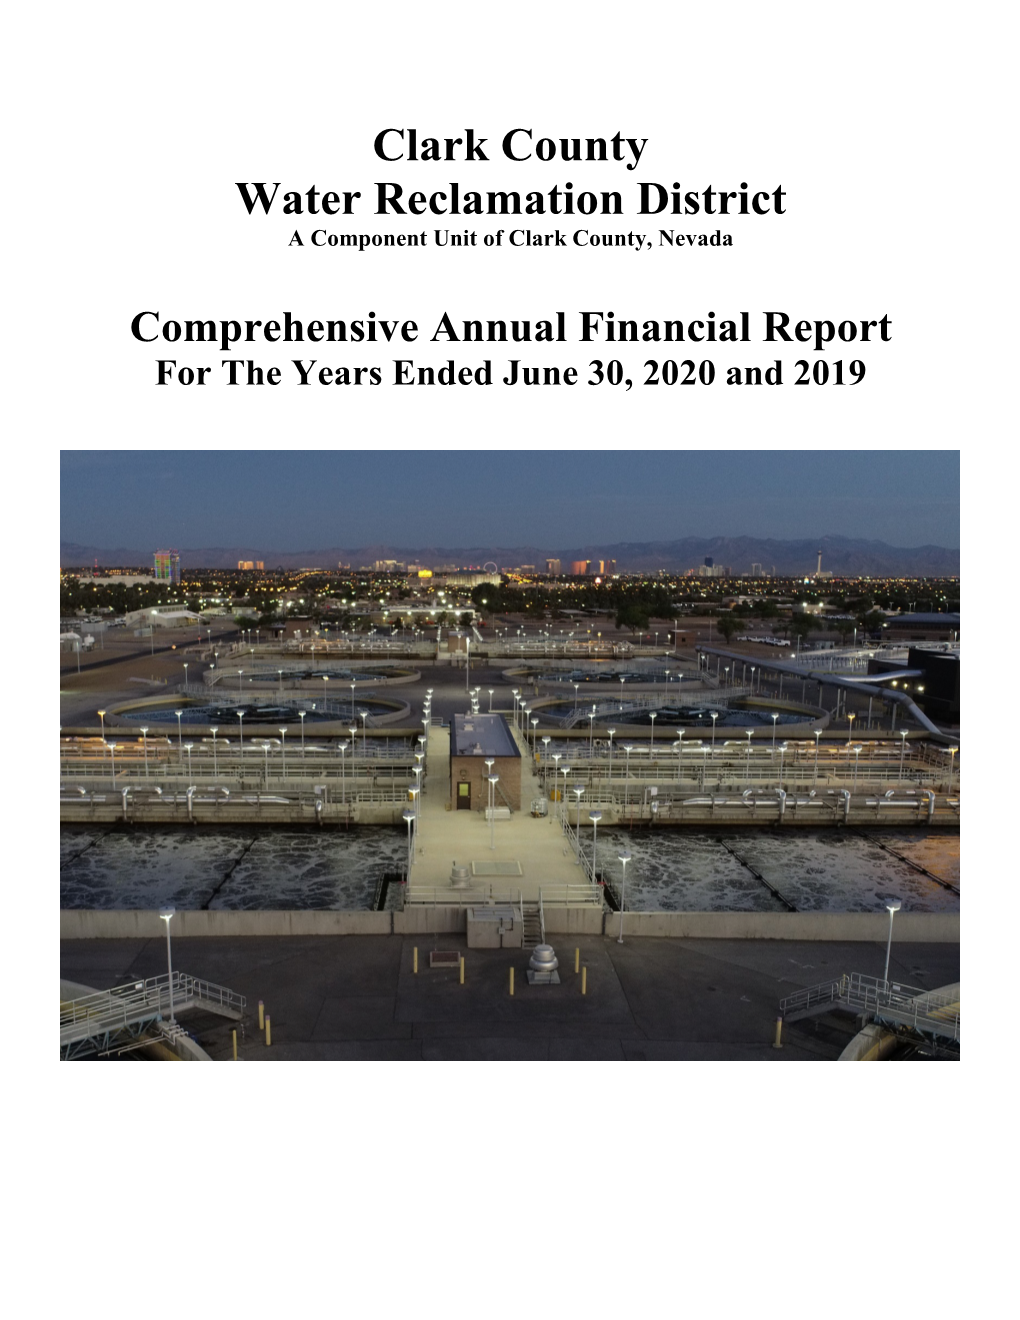 Comprehensive Annual Financial Report for the Years Ended June 30, 2020 and 2019